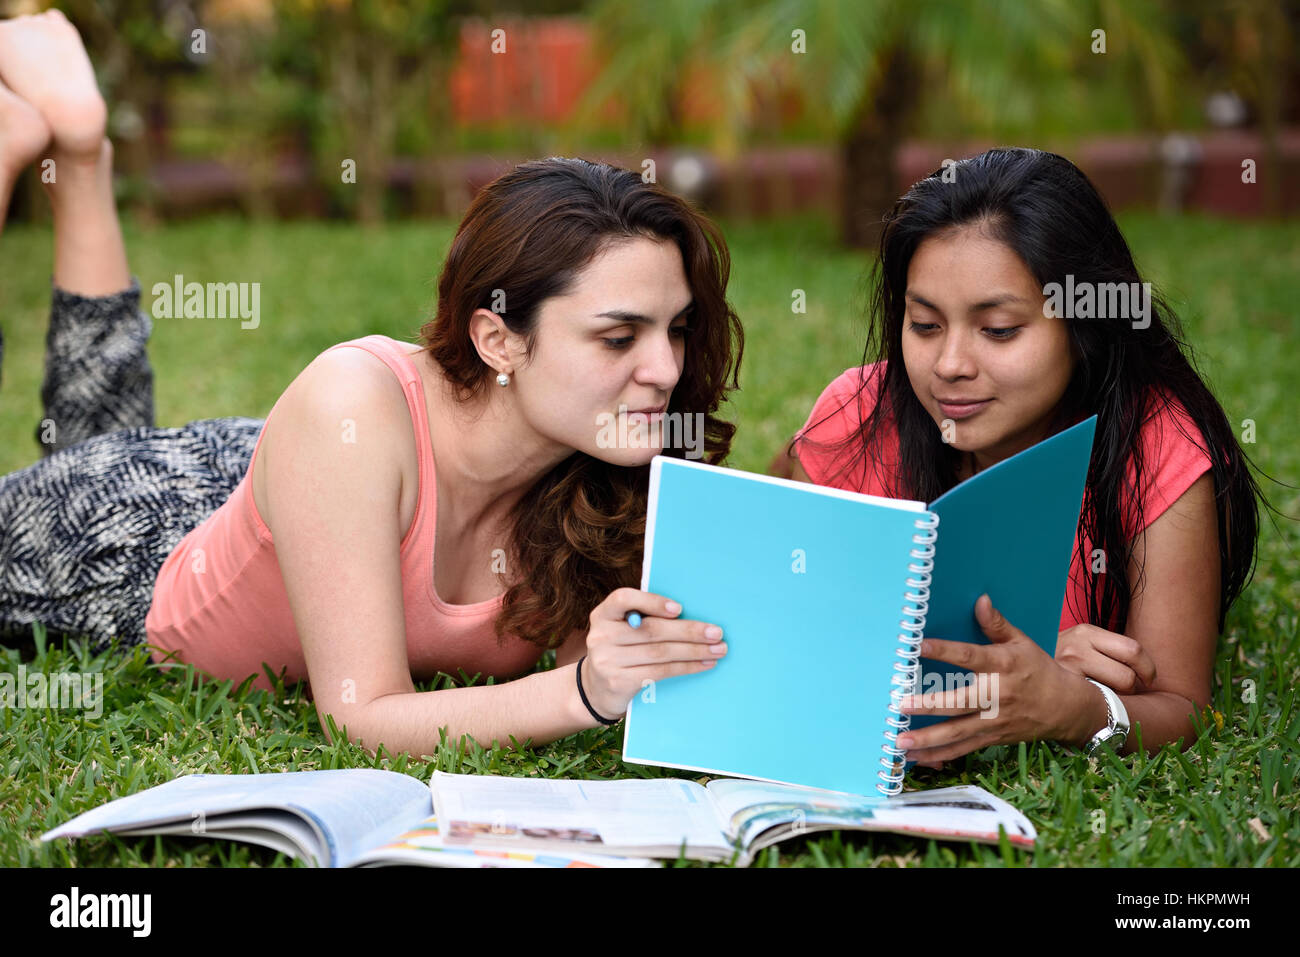 two girls reading notebook on grass in park Stock Photo